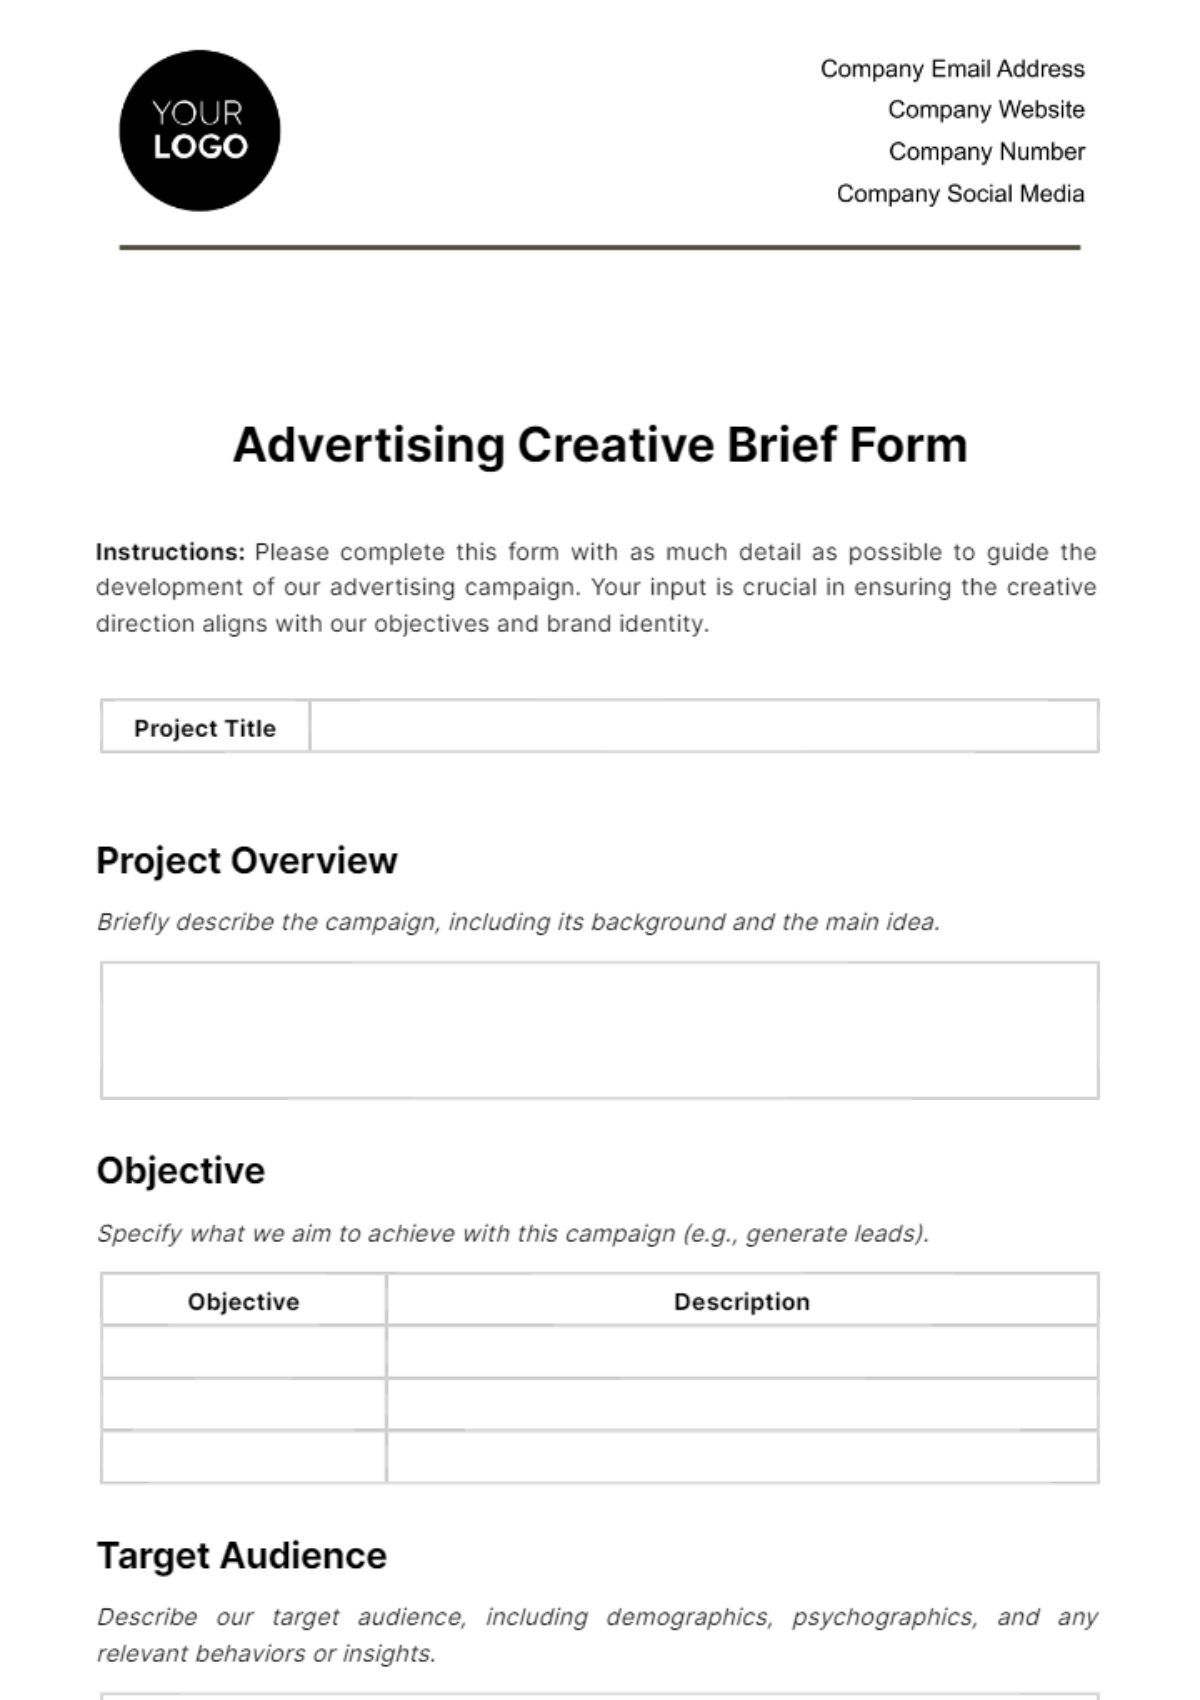 Free Advertising Creative Brief Form Template